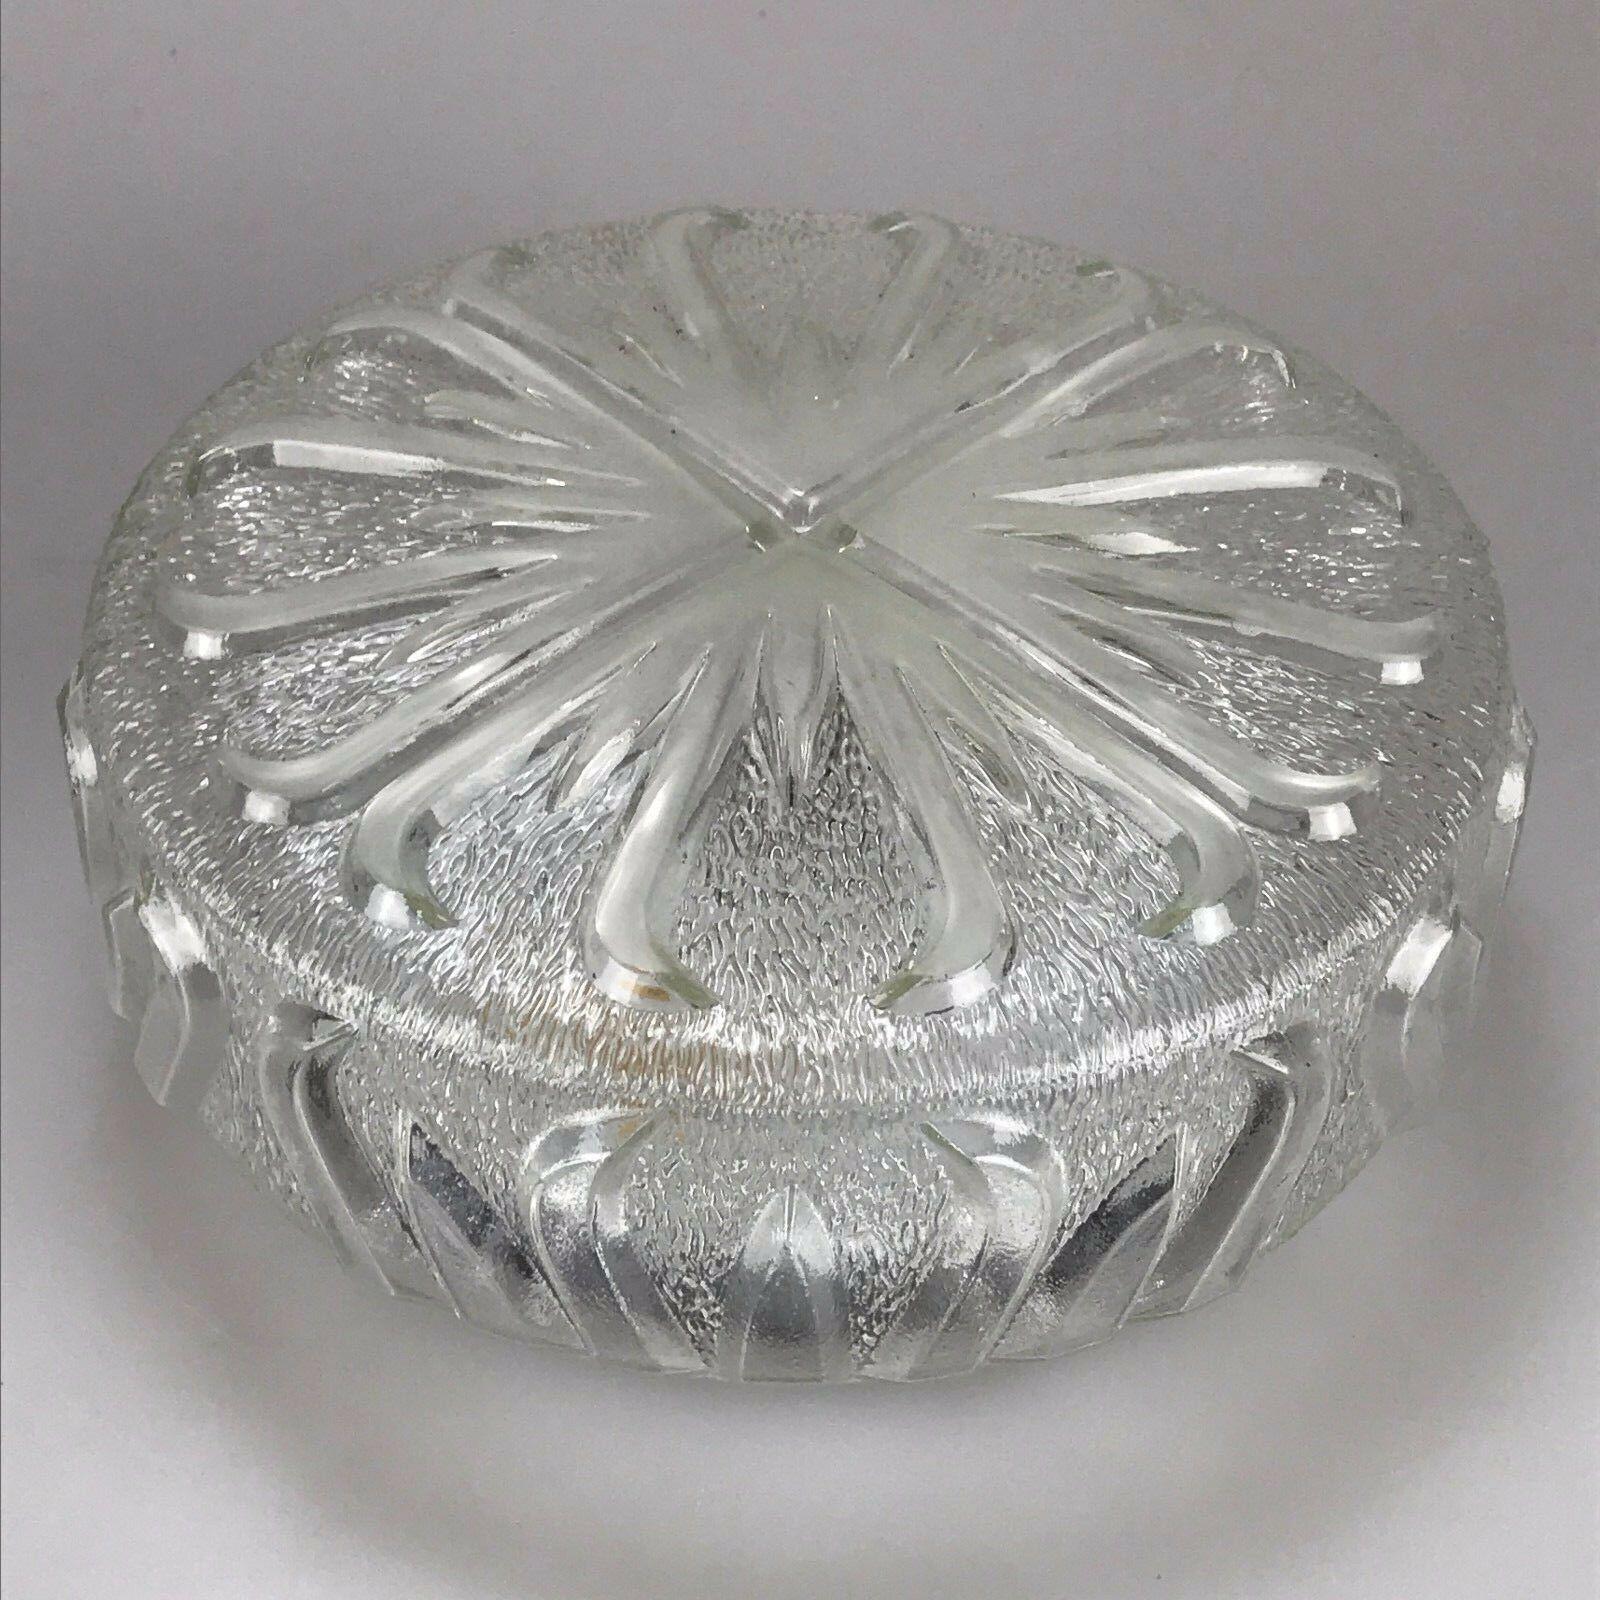 60s 70s lamp Luminaire Plafoniere flush mount glass space age design

Object: plafoniere

Manufacturer:

Condition: good

Age: around 1960-1970

Dimensions:

Diameter = 25cm
Height = 10cm

Other notes:

The pictures serve as part of